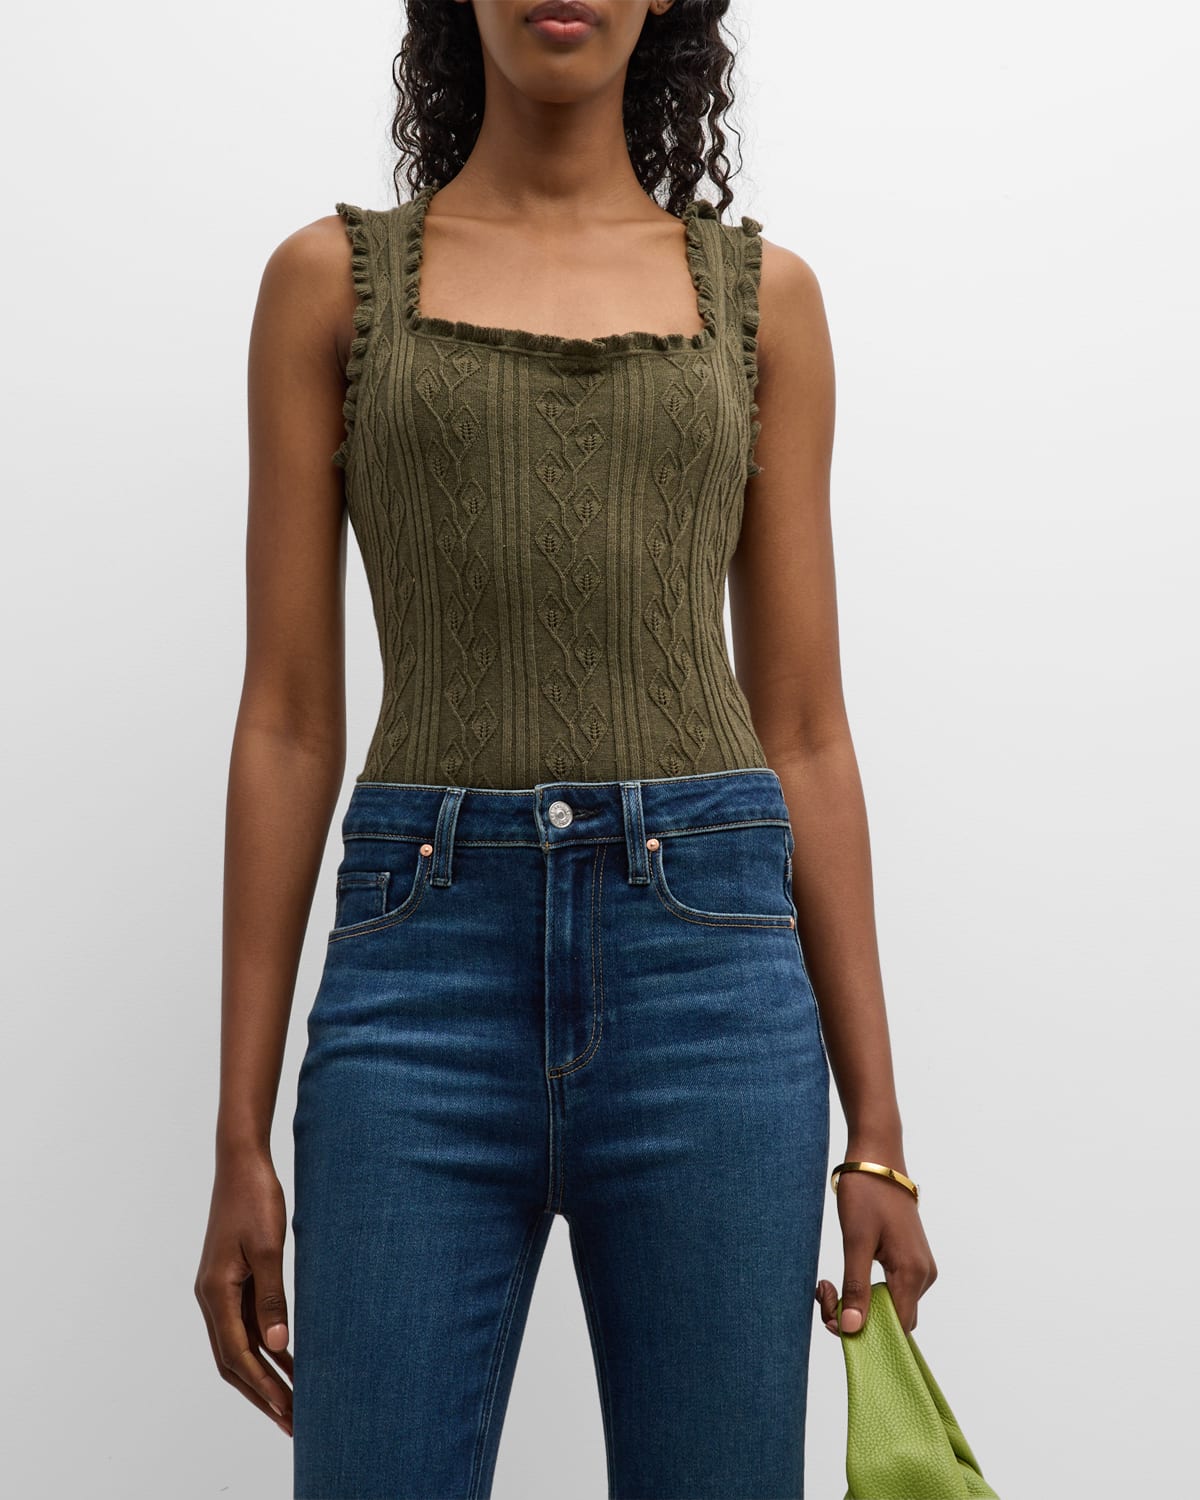 PAIGE FOSCA CABLE-KNIT TANK TOP